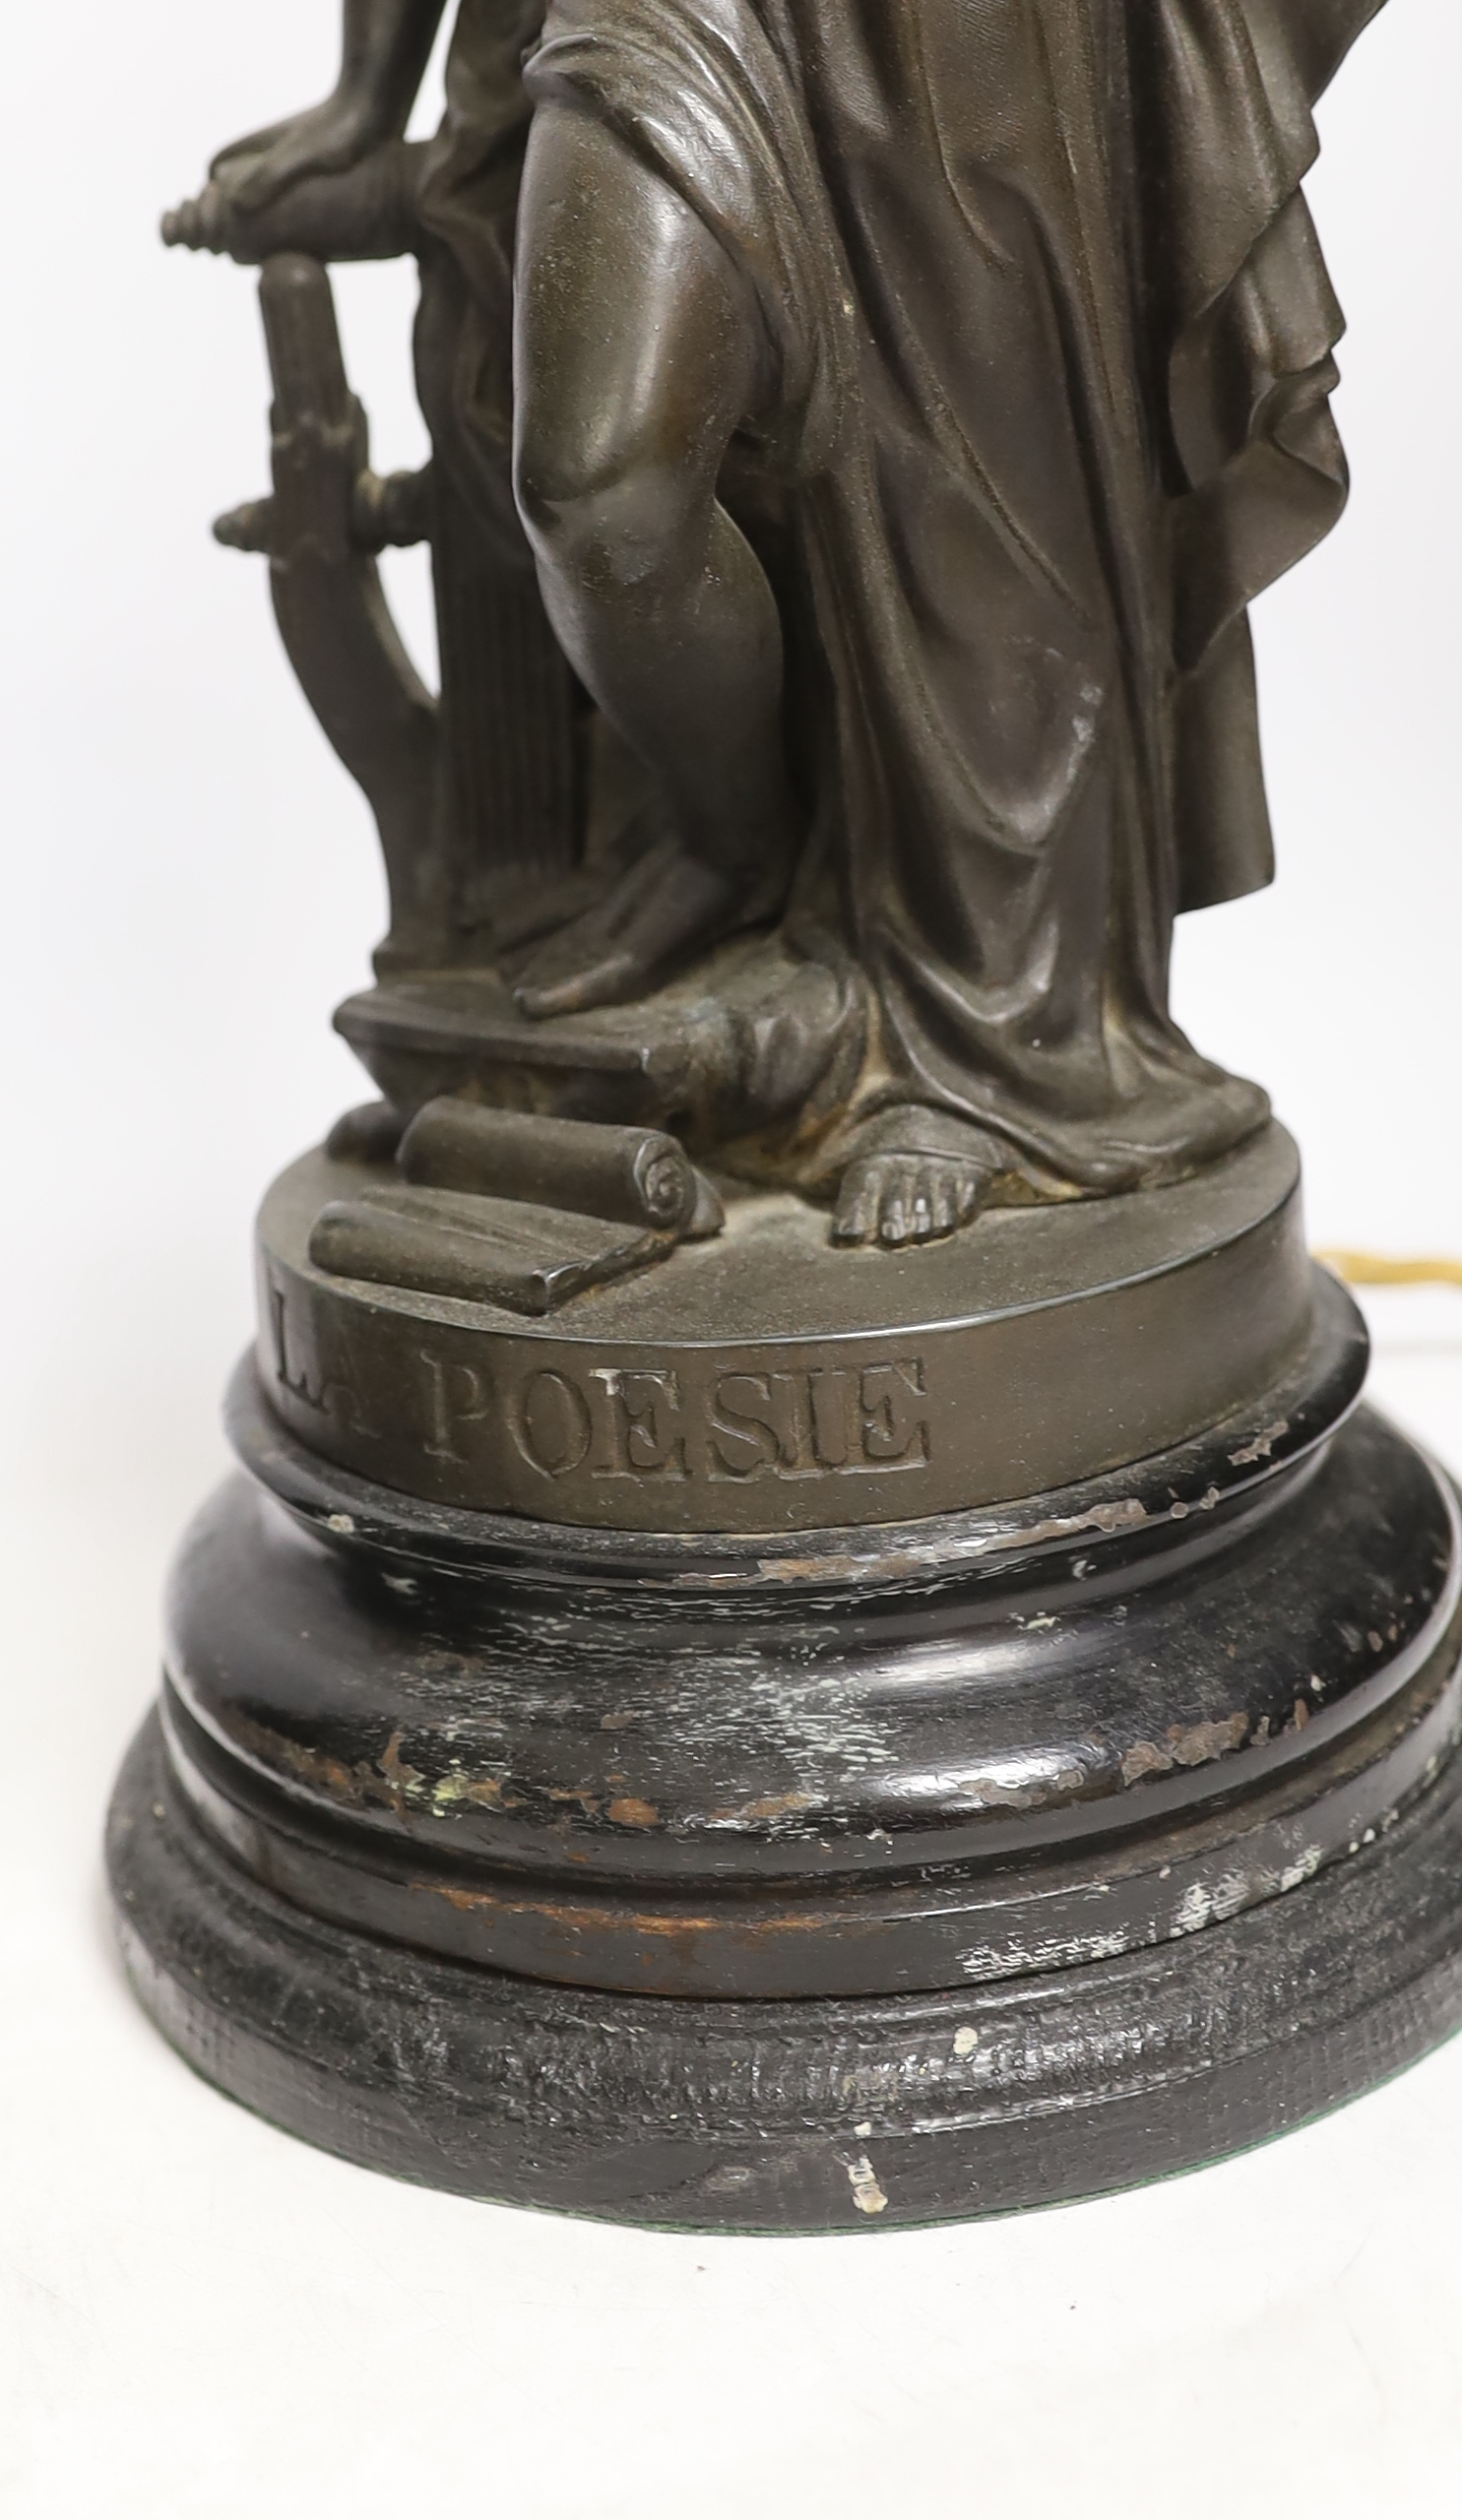 A pair of spelter figural table lamps emblematic of poetry and history, overall 56cm high